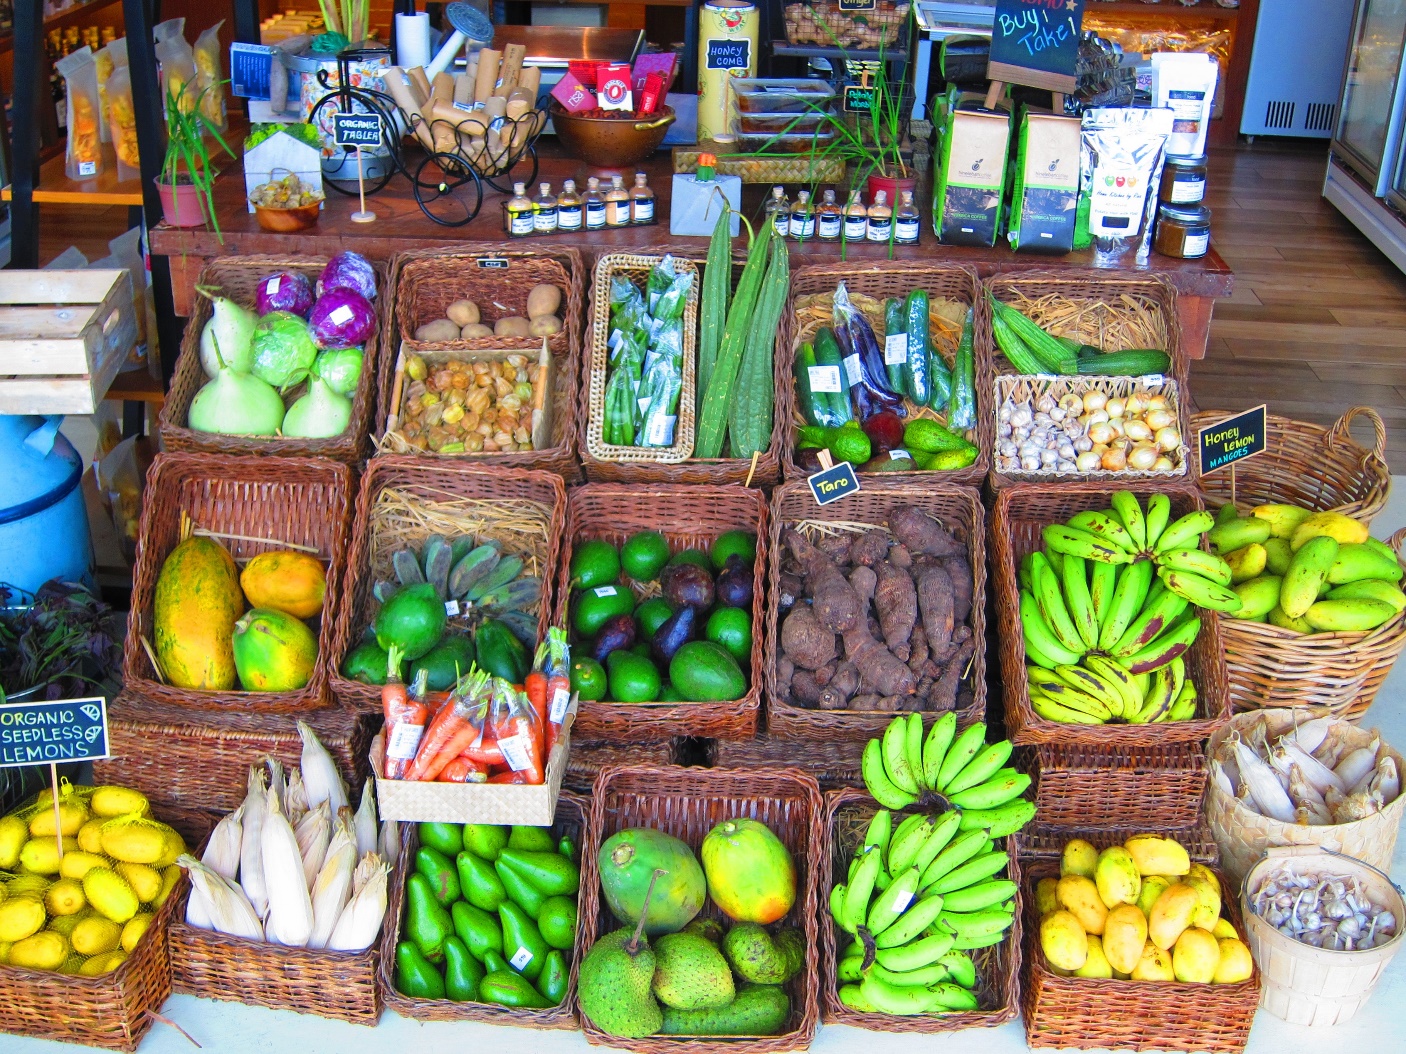 Display of Fruits and Vegetables